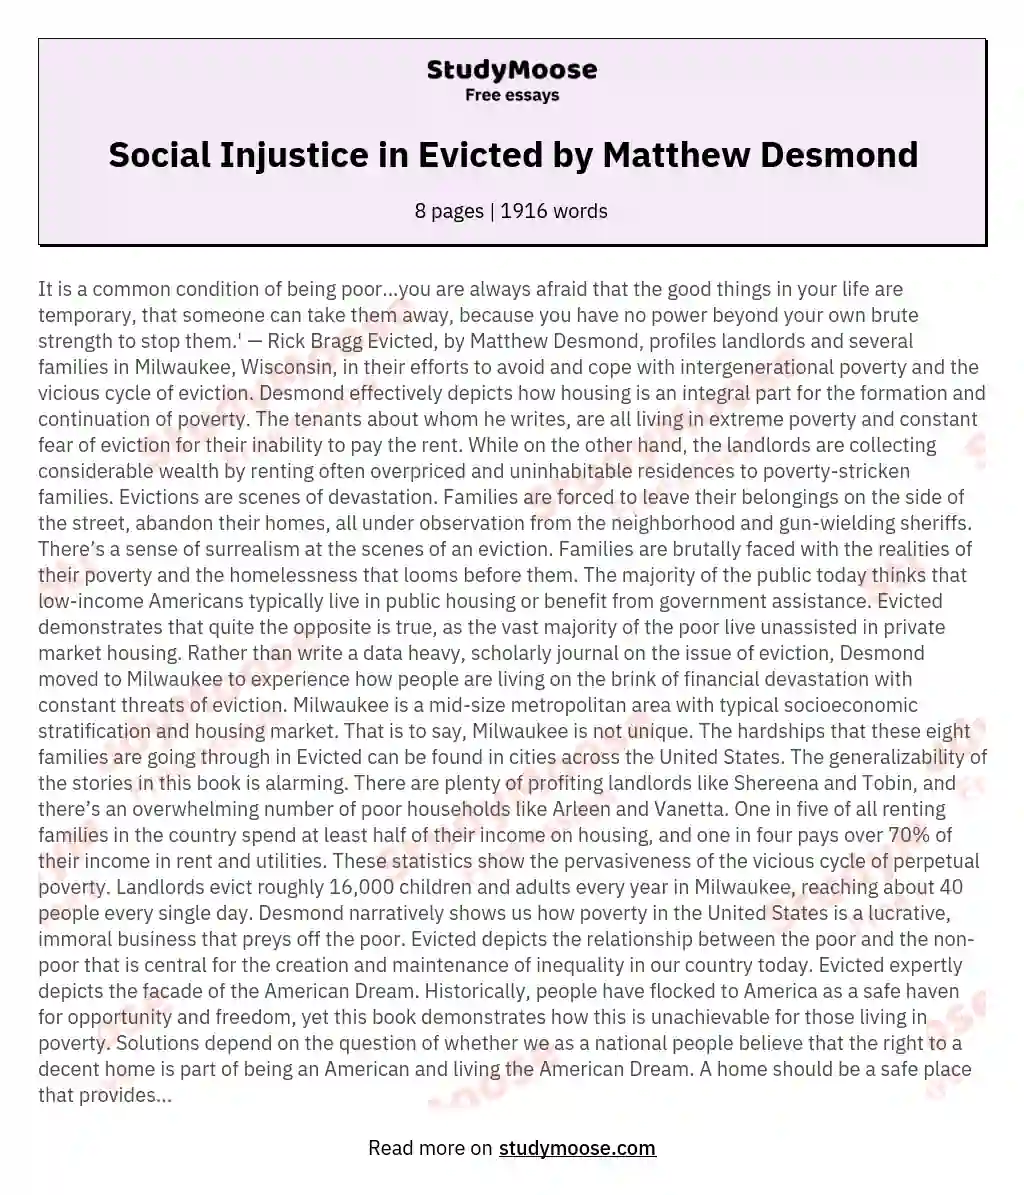 Social Injustice in Evicted by Matthew Desmond essay